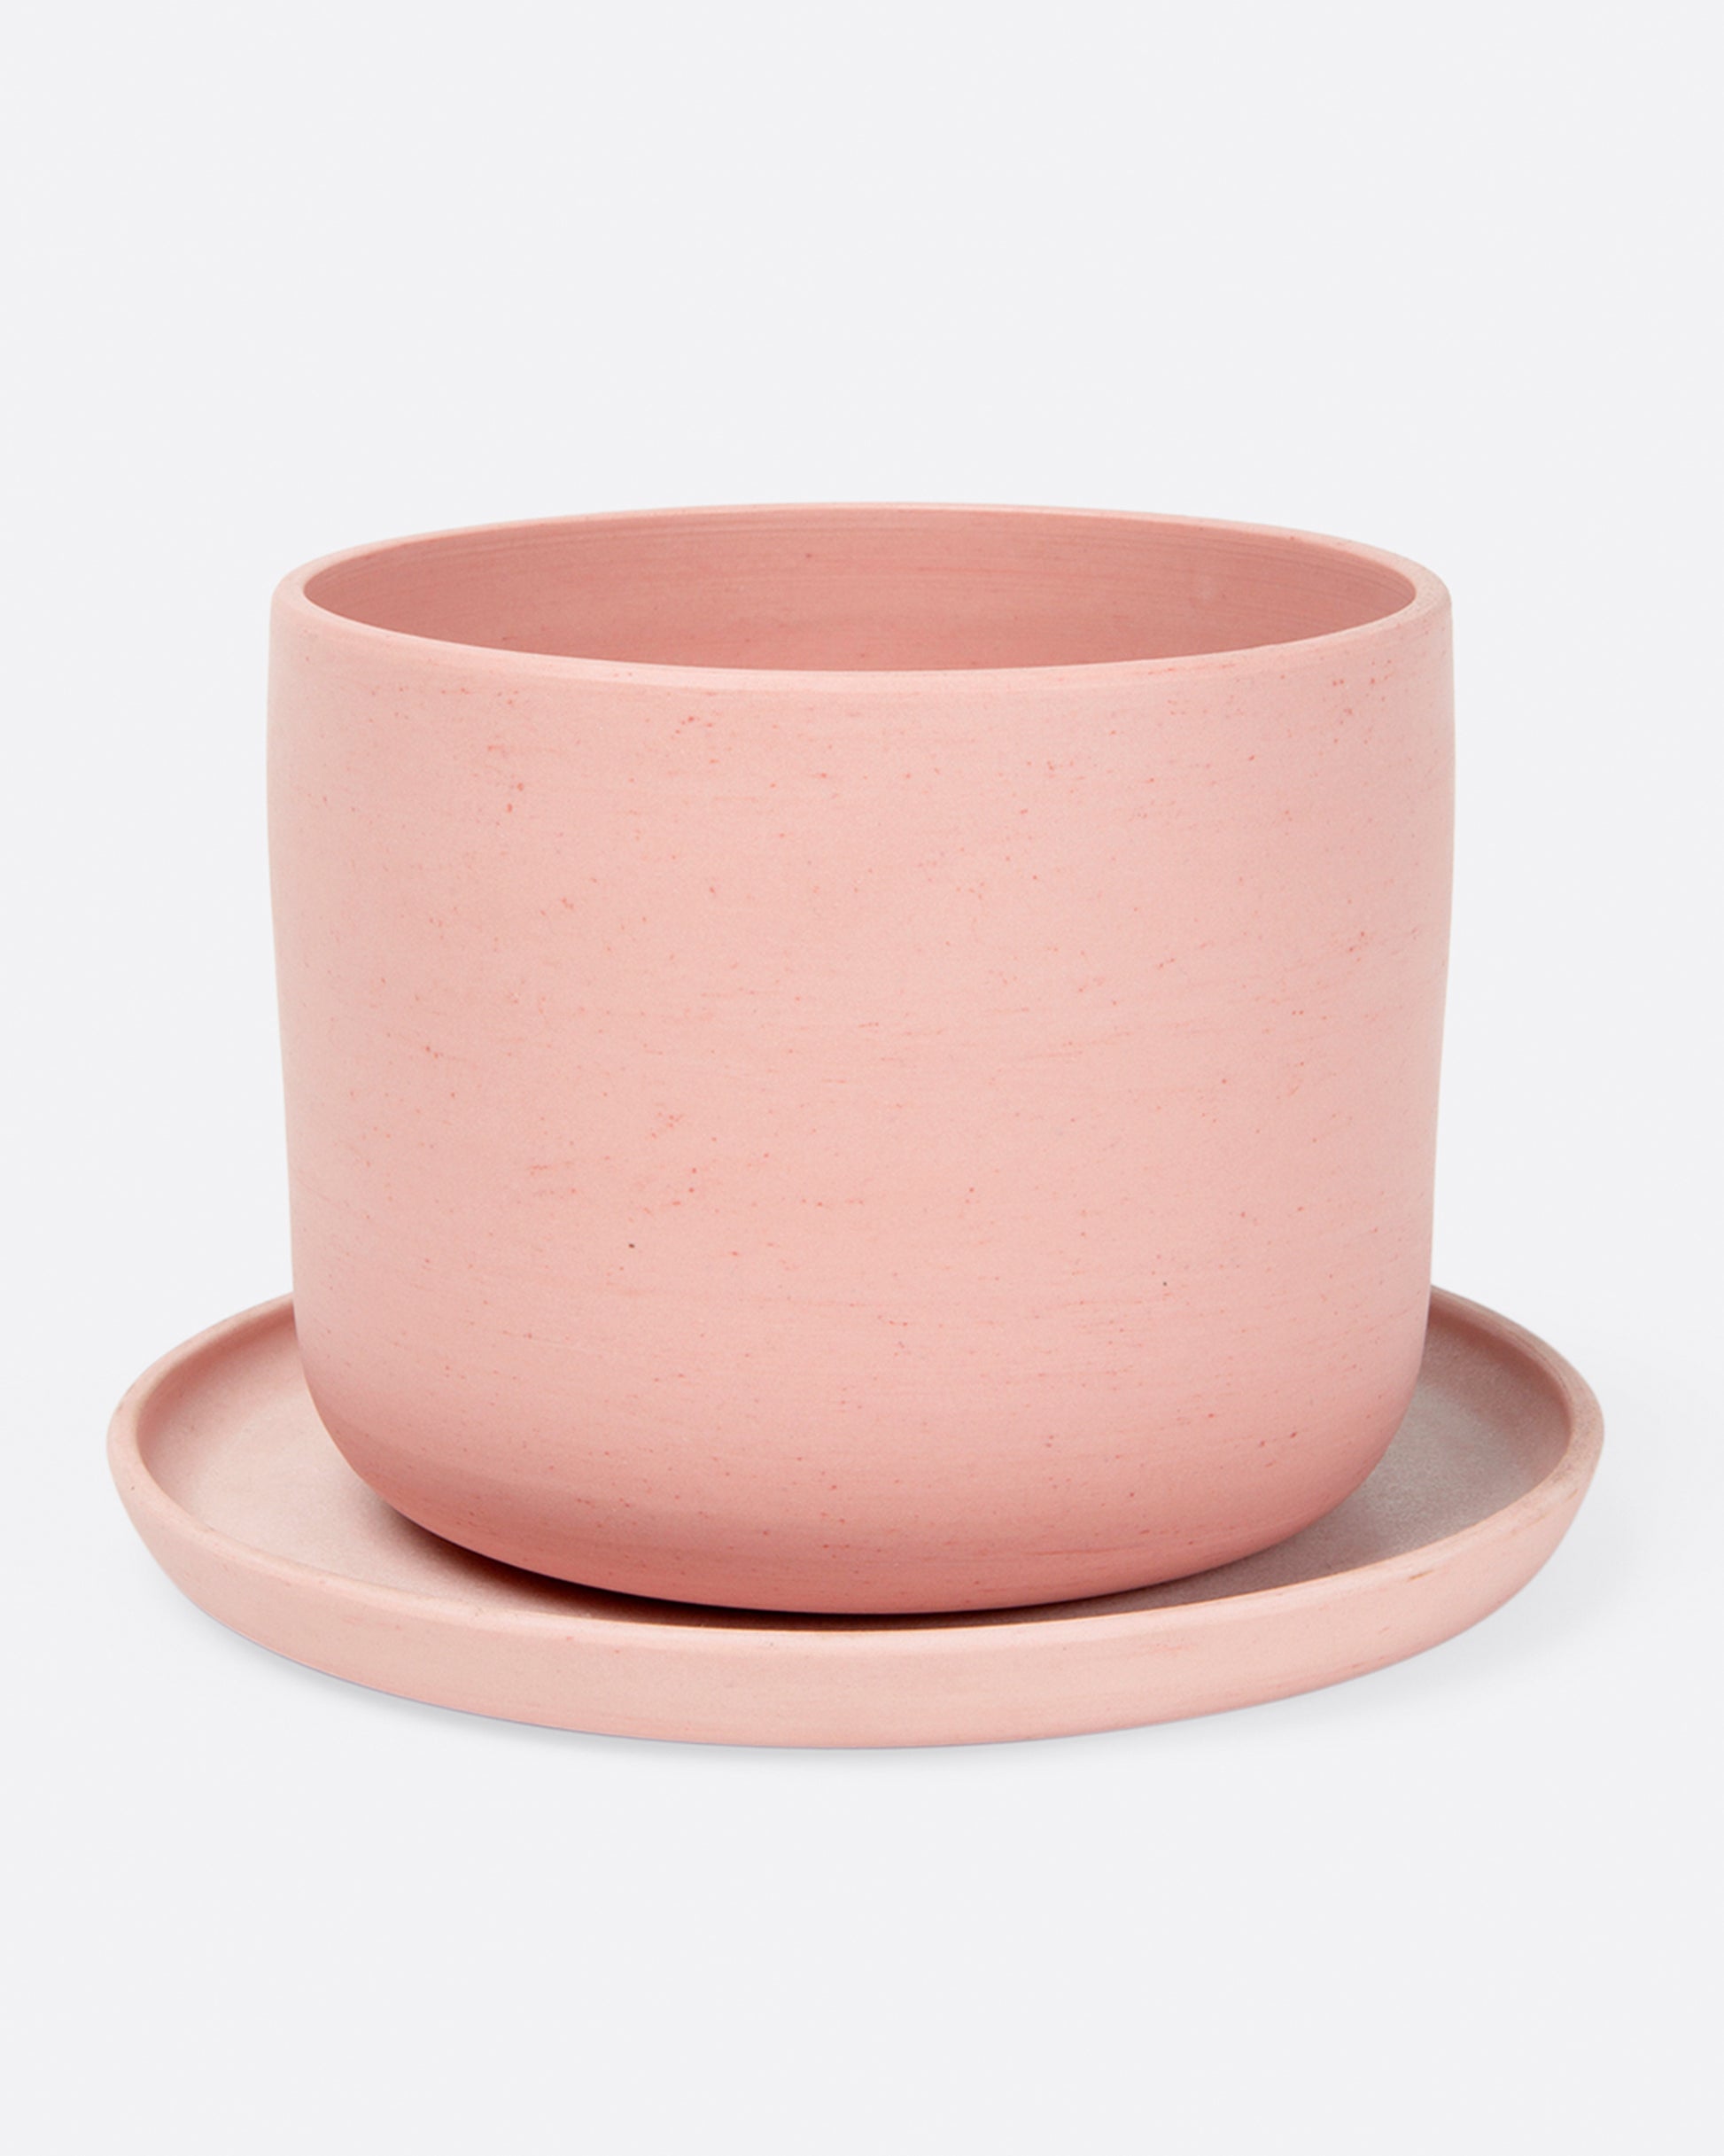 Smooth, matte, tinted porcelain planters with matching saucers.